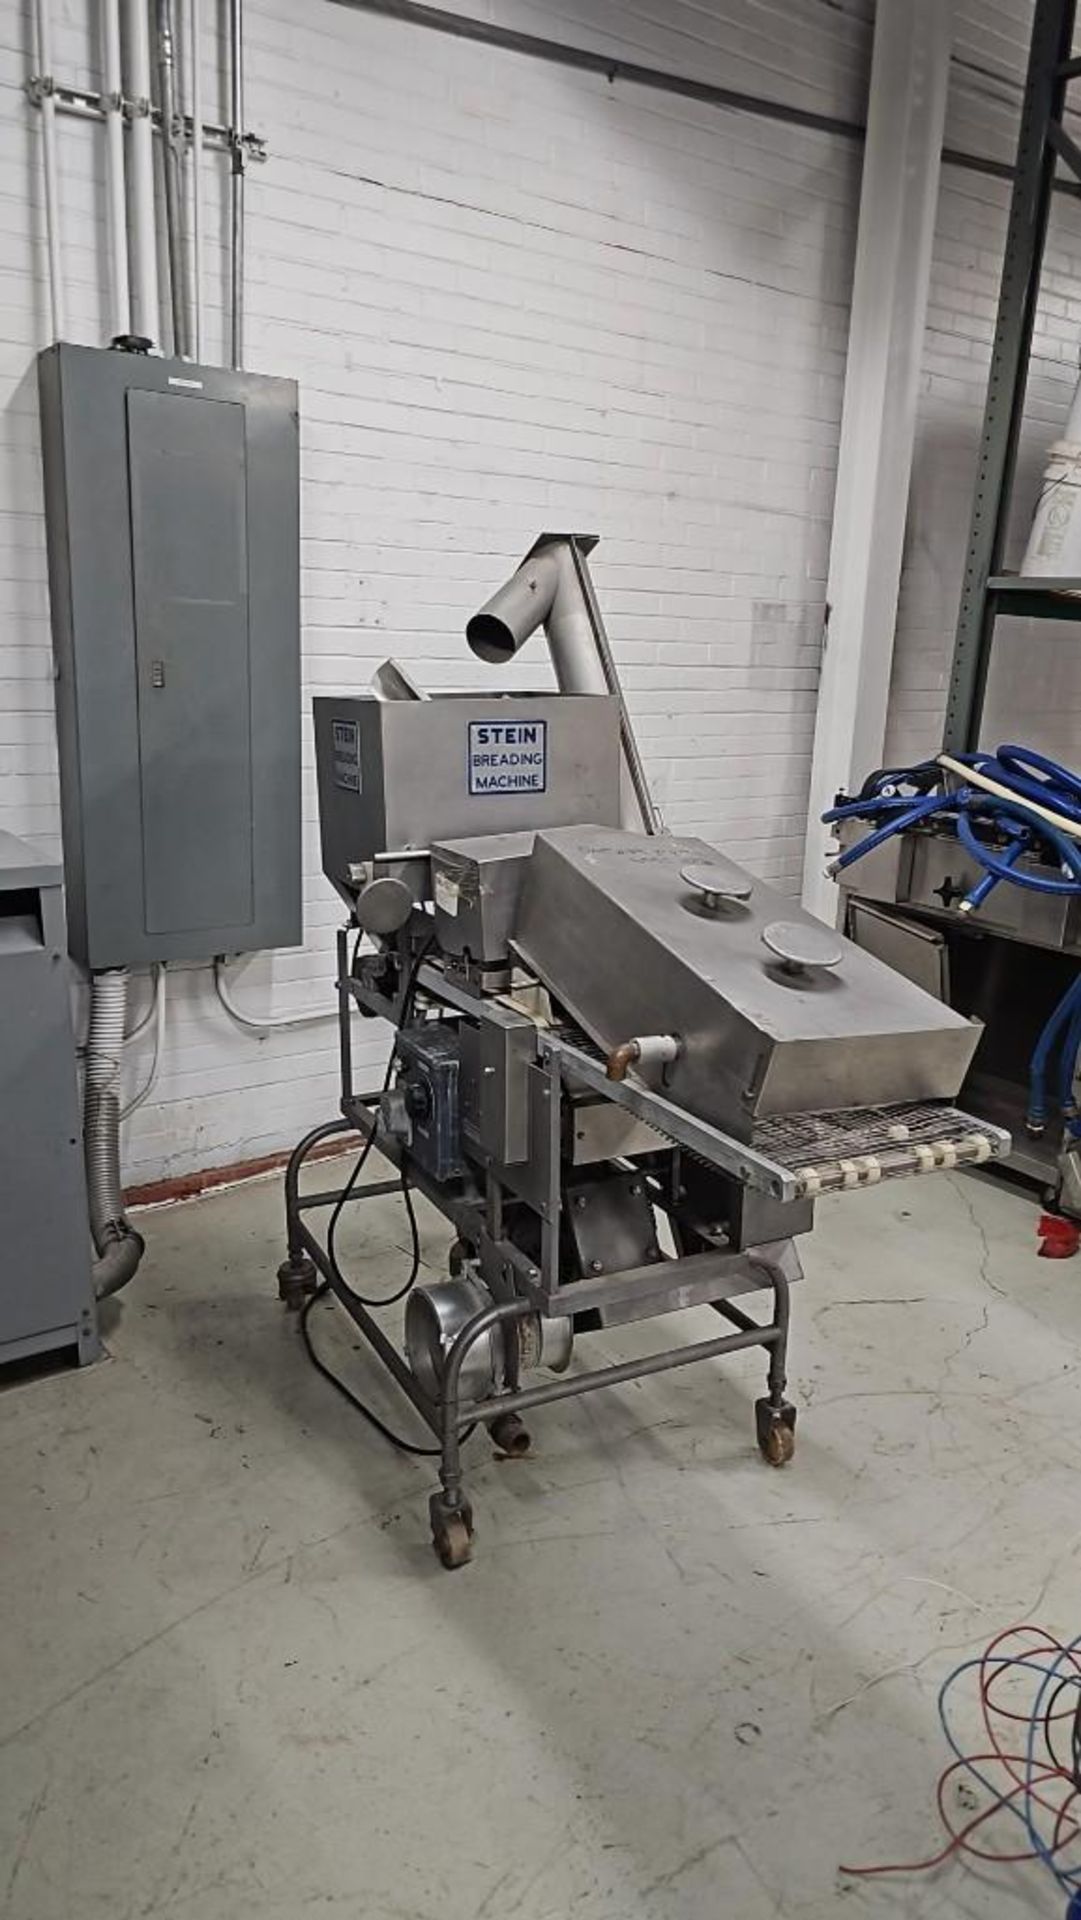 Stein S-2 Stainless Steel Breading Machine - Image 2 of 16